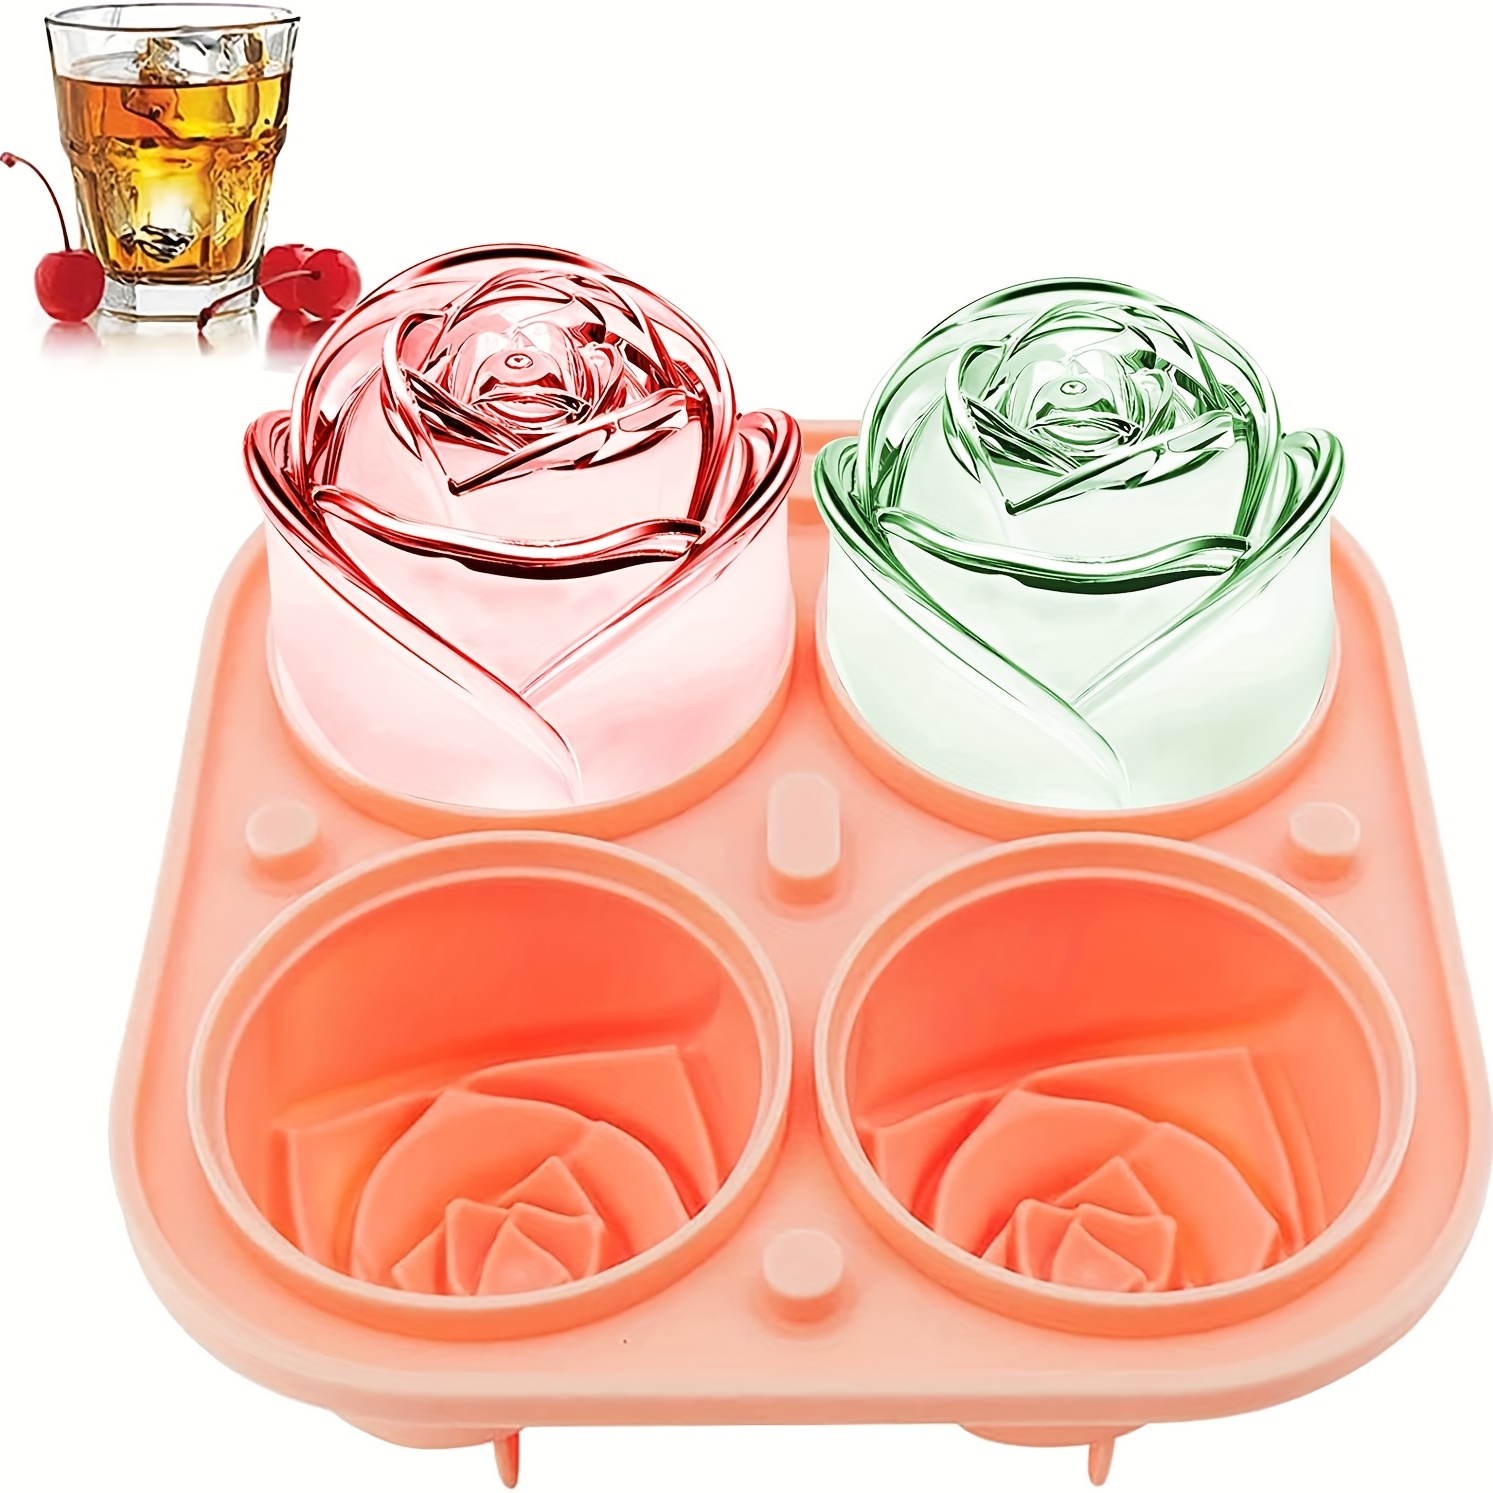 Shaped 3D Large Skull Ice Cube Mold Tray, Stackable Silicone Round Ice  Maker for Whiskey Drinkers, Bartenders, Gift Exchanges, Home Bars and  Holiday